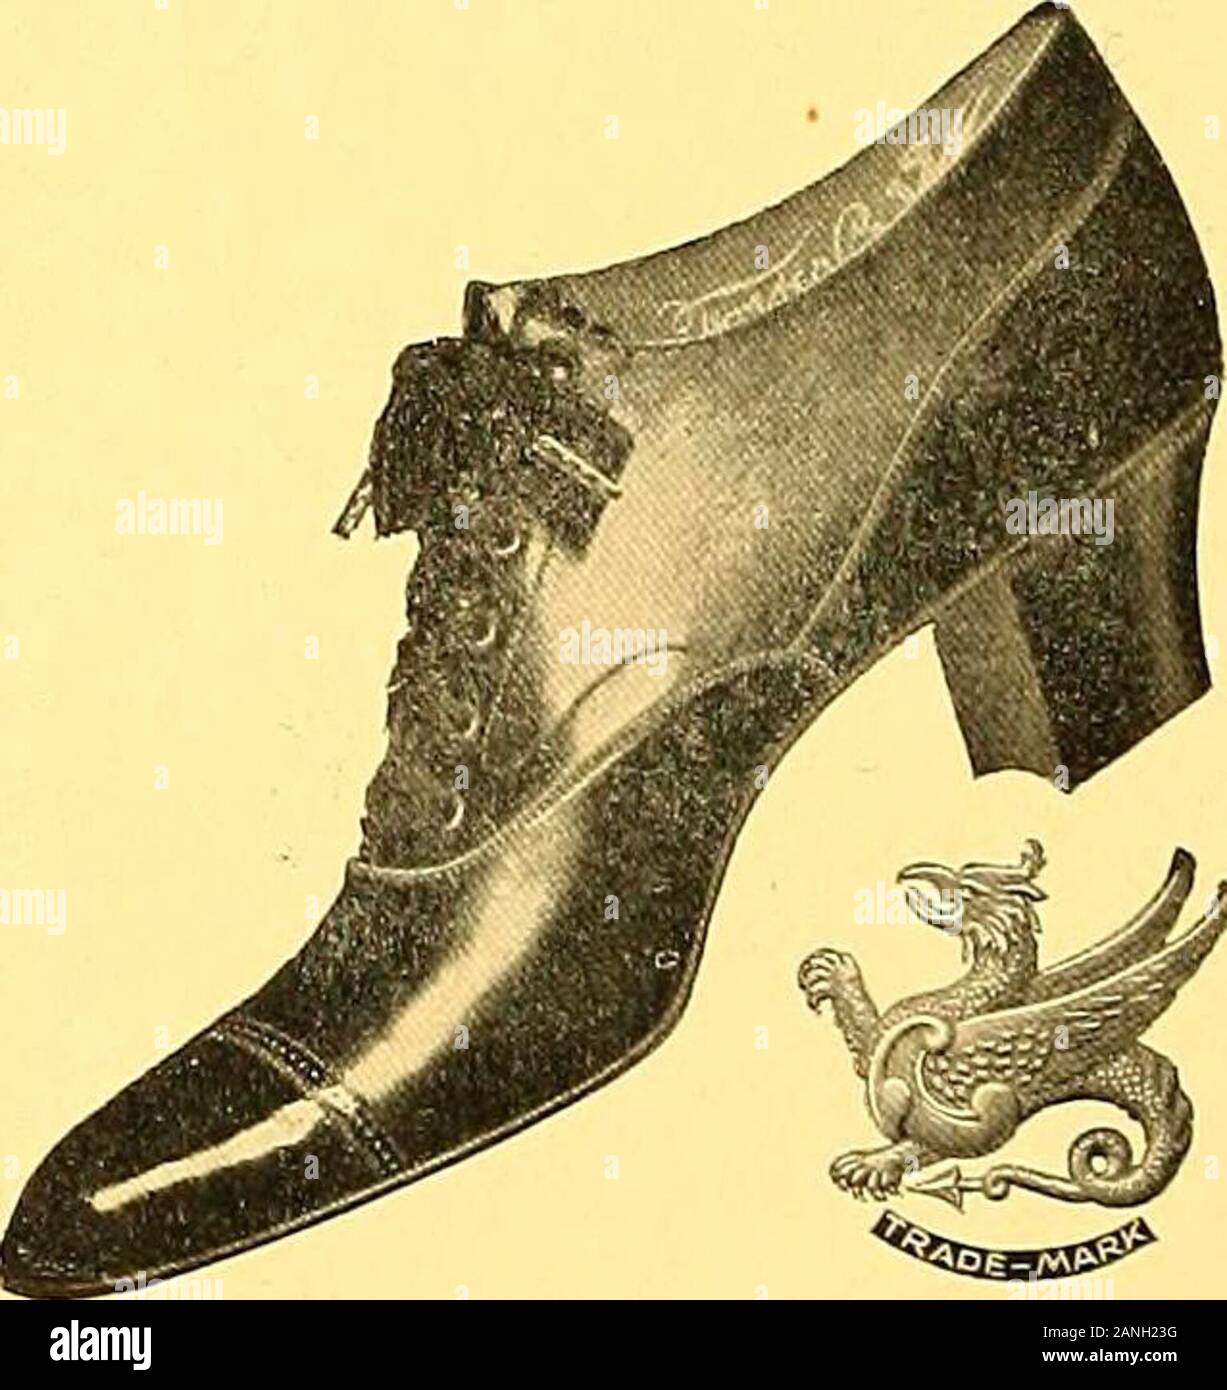 Ravelings . it VOGUE, M Says, THIS PATENT OXFORD, IS THEPROPER STYLE FOR YOUNG MEN, A T $3.50 and $5.00 WE ARE SHOWING THE NICEST STYLES KNOWN TOSHOEDOM.. 5BEAVTIFVLSTYLES FOR LADIES WHITE CANVASS TIESGUN METAL TIES PATENT COLT TIESPatent Colt Button Oxfords? Tan Russia Calf Oxfordsat $2.00, $3.00, $3.50 and $4.00 1VT. H. MORRIS, GOOD SHOES 72 EAST SIDE OF SQUARE. Stock Photo